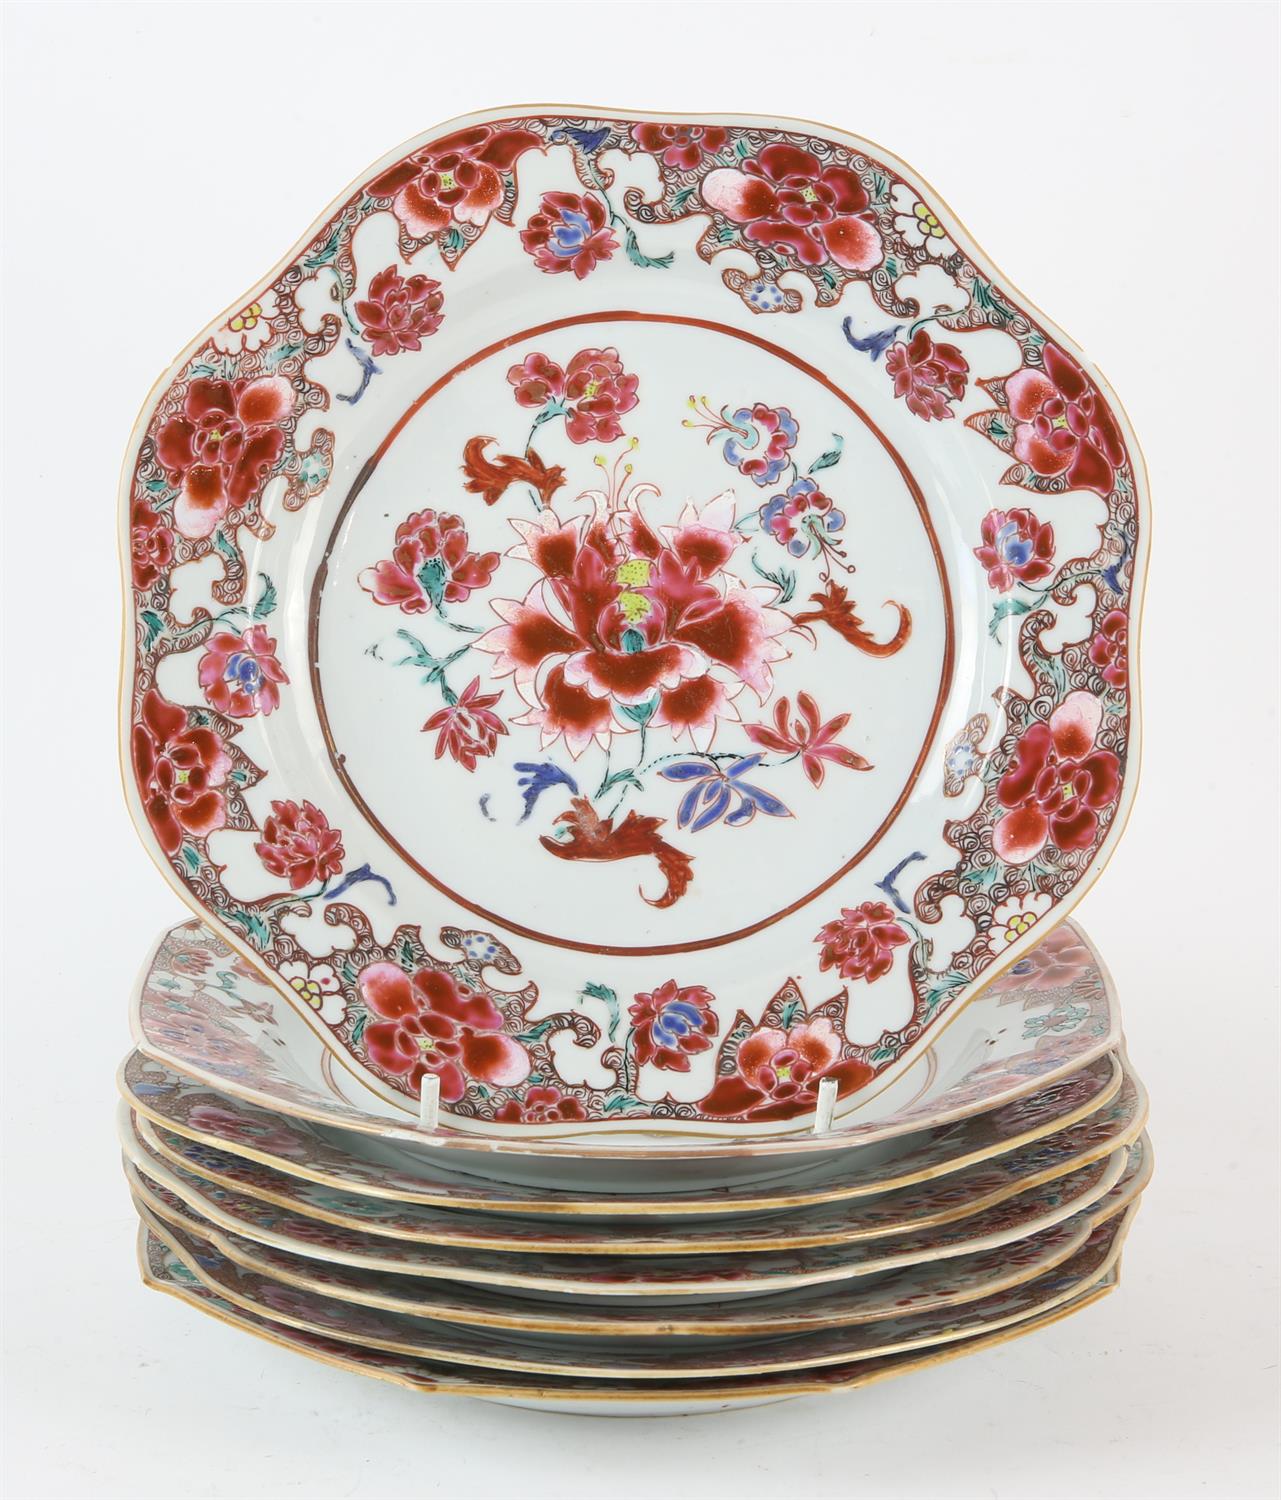 Eight famille rose dishes; each one decorated with floral designs and about 22.5 cm diameter, - Image 16 of 28